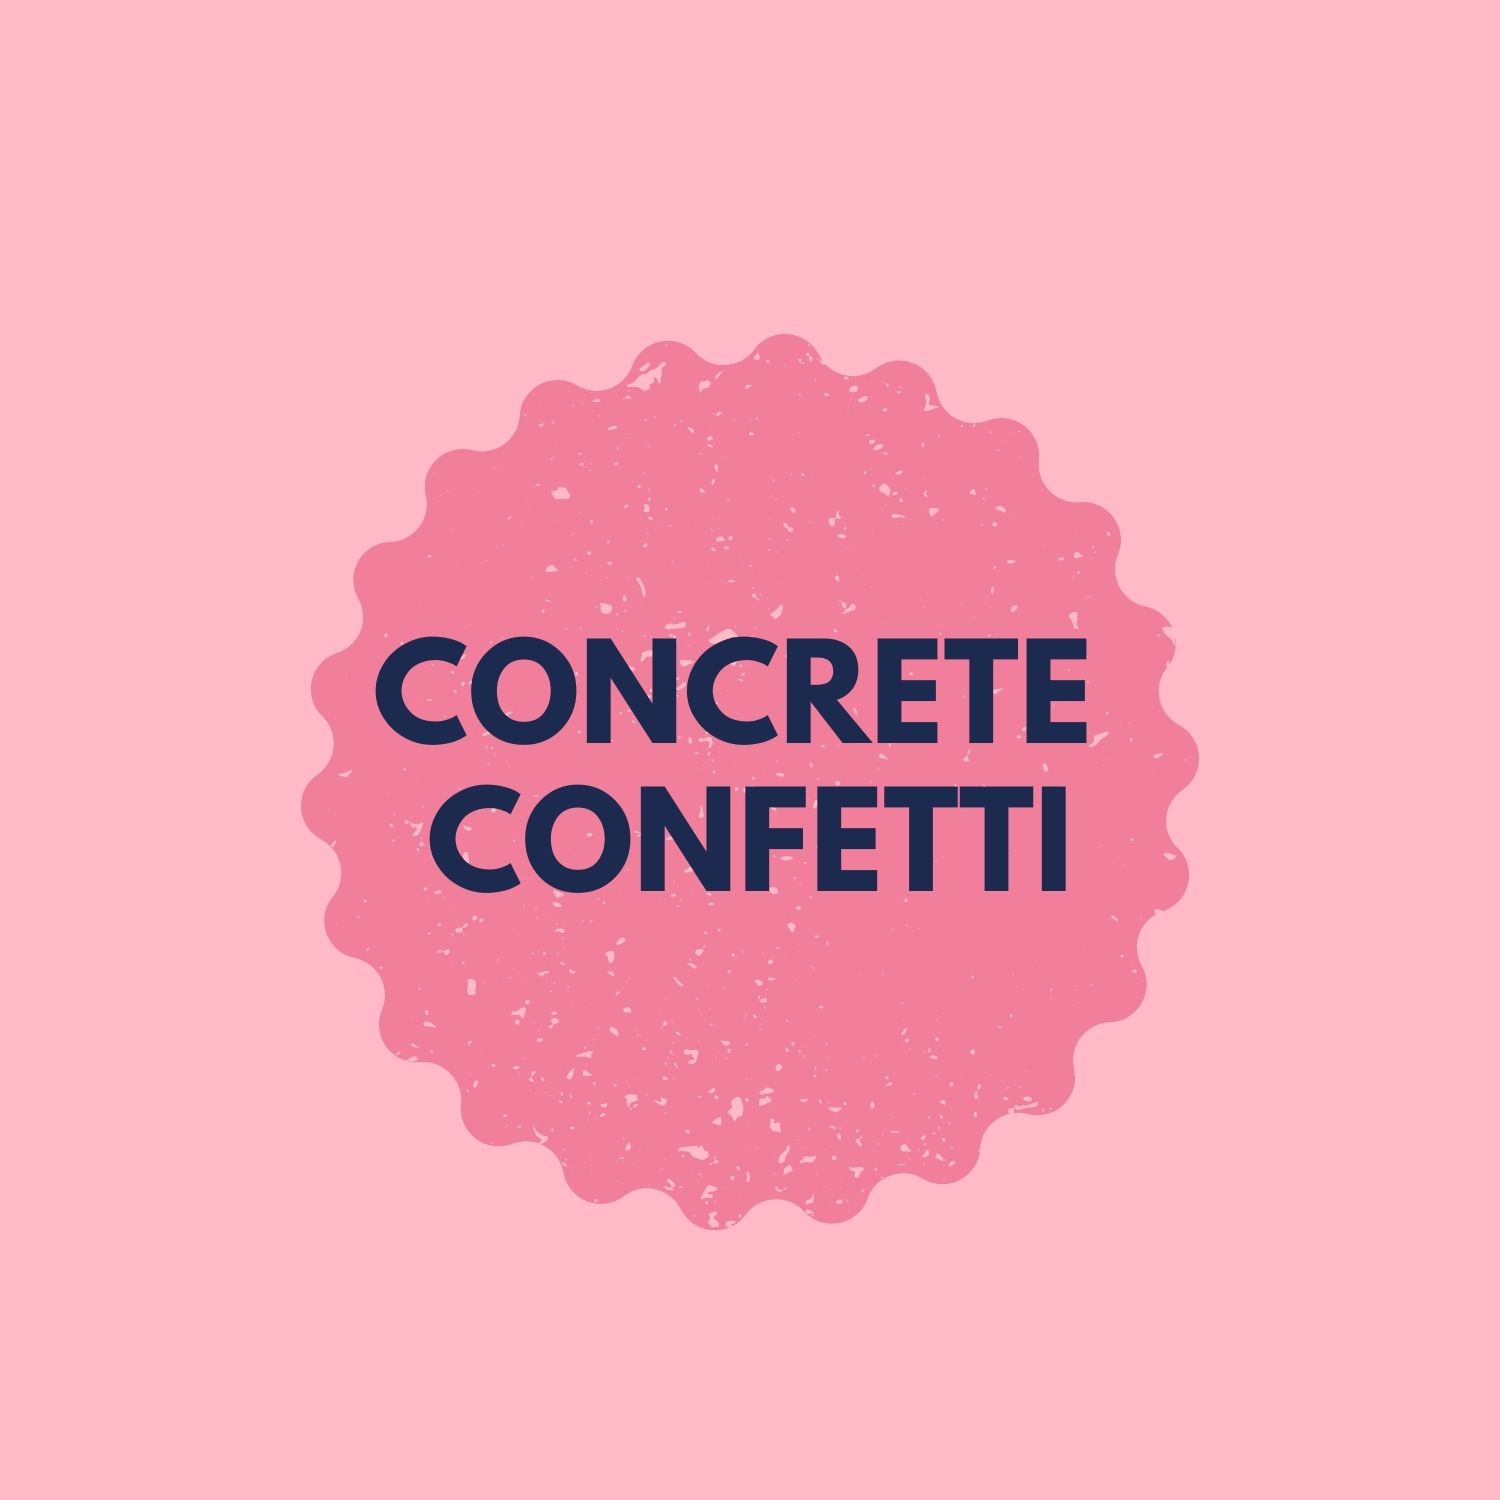 Cathy from Concretefetti